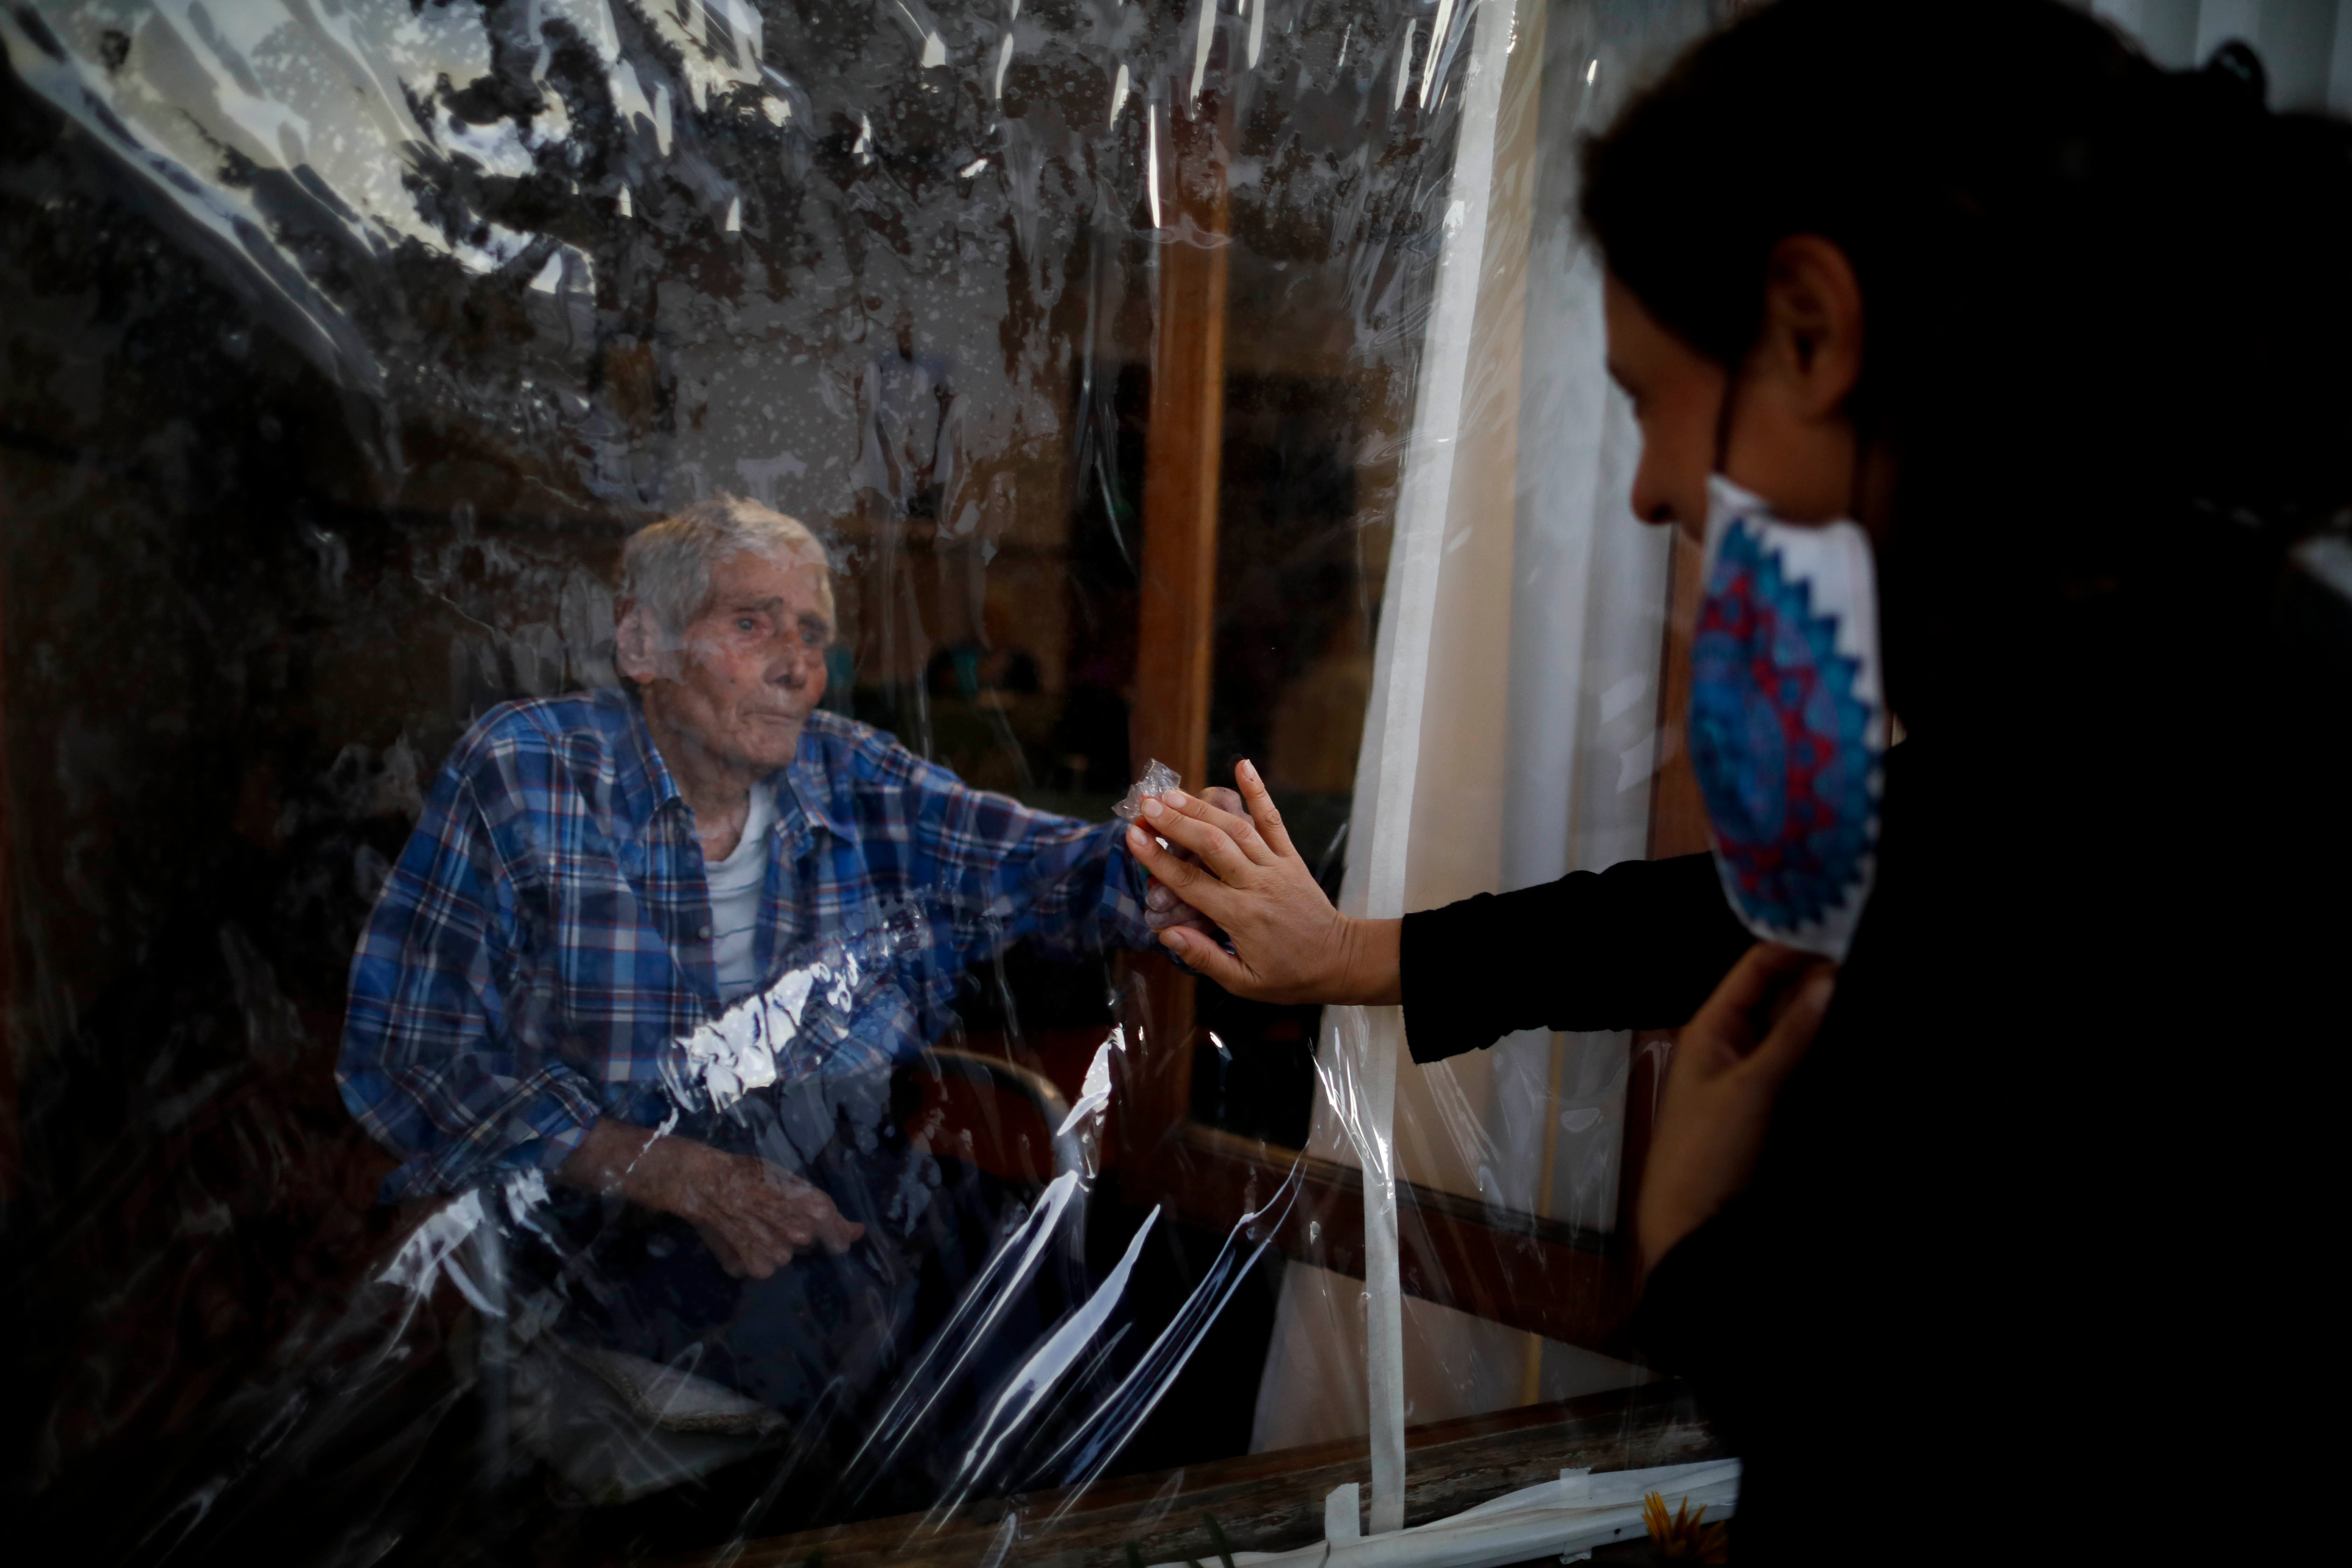 A man and woman touch hands through a plastic sheet